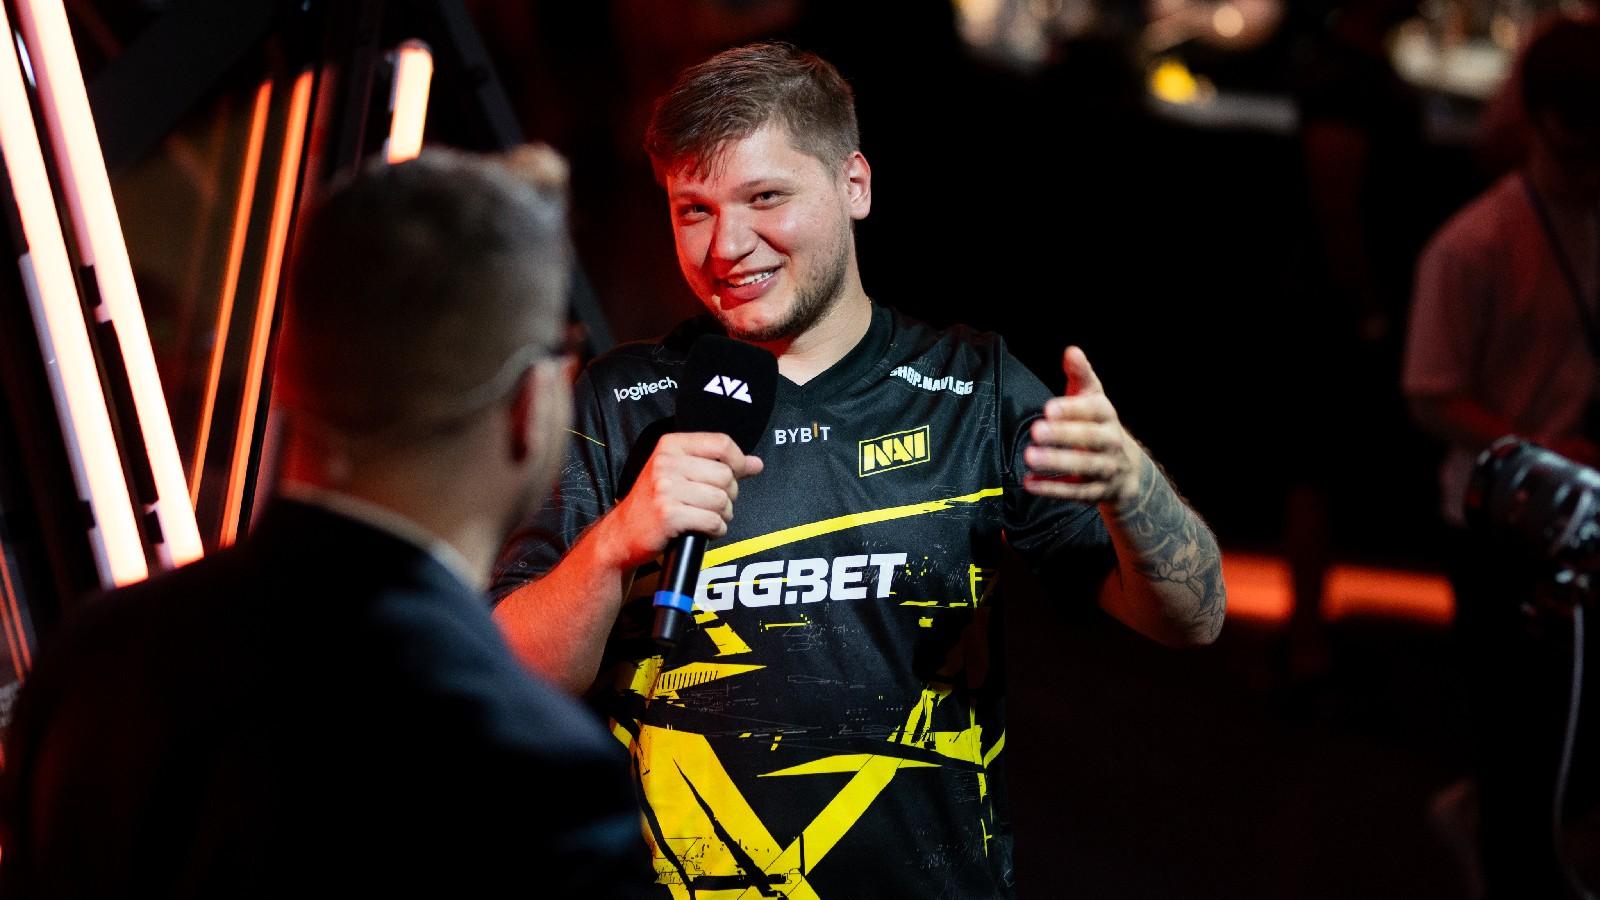 s1mple talking in a interview